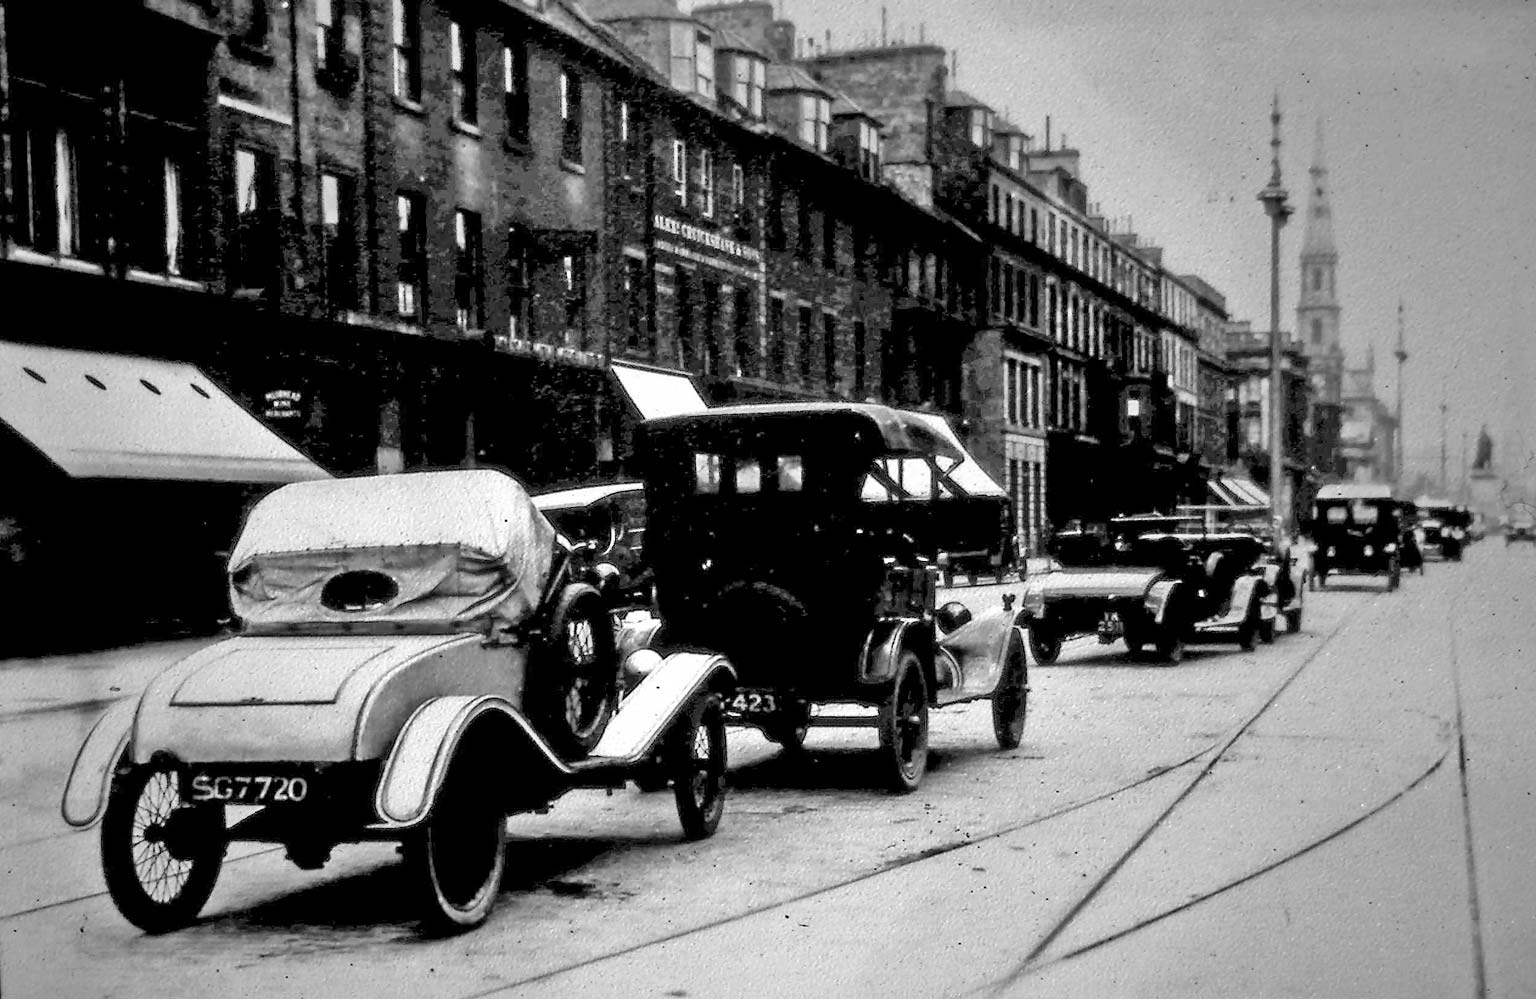 George Street in the 1920s  -  SG7720 and other vehicles